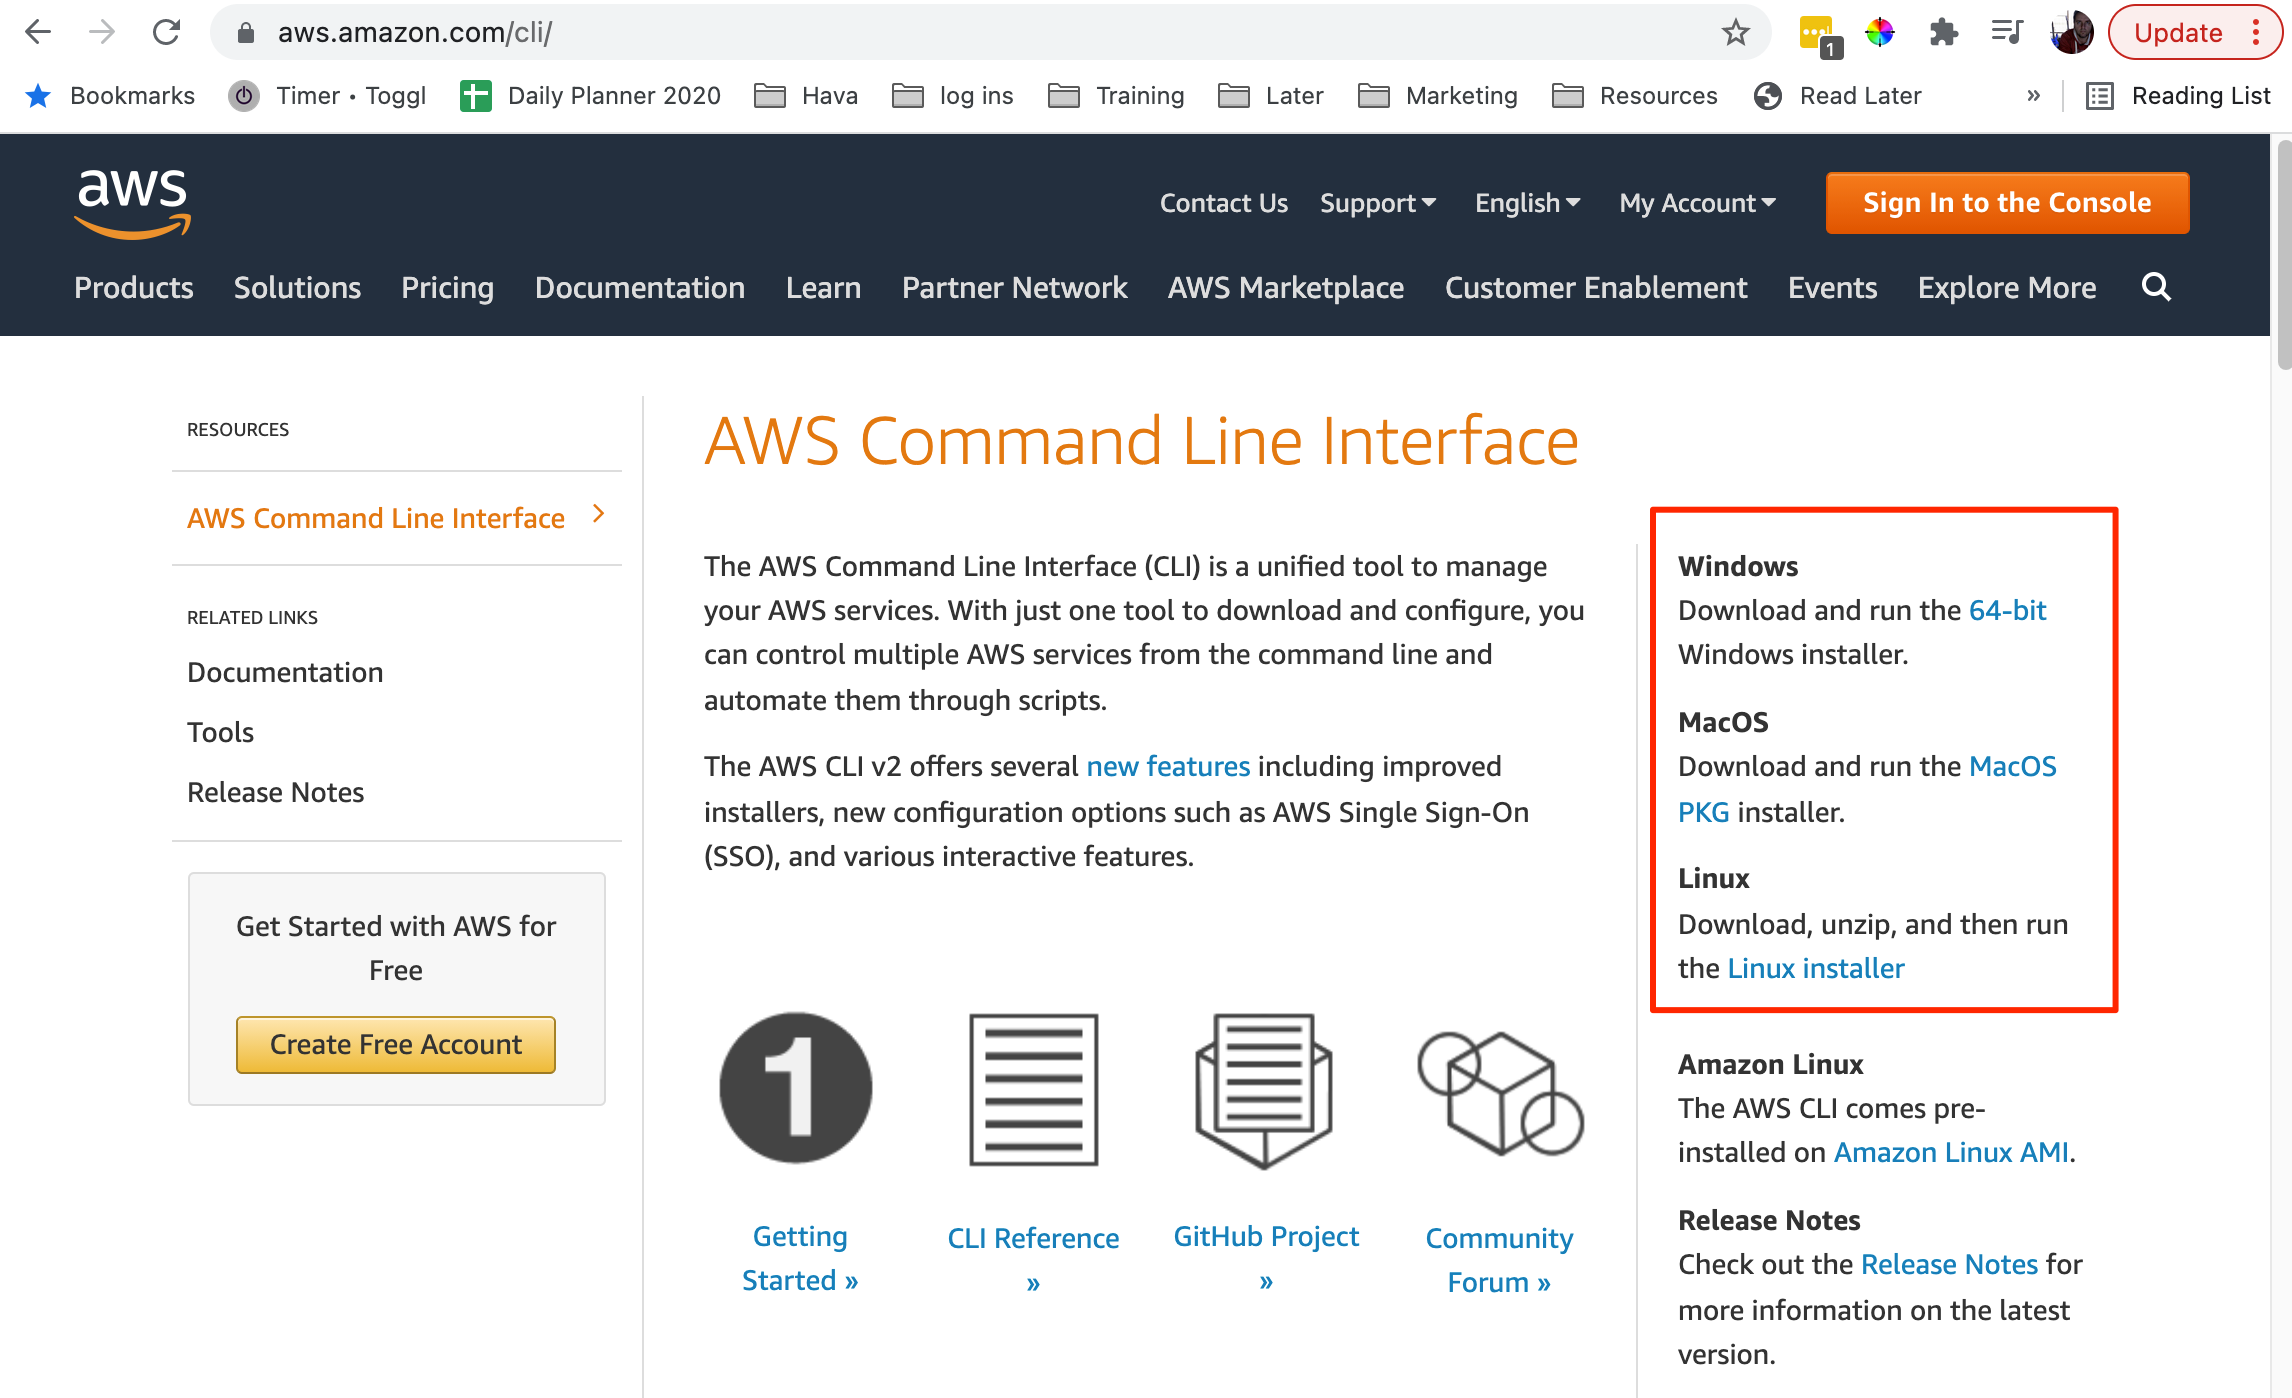 AWS_Command_Line_Interface